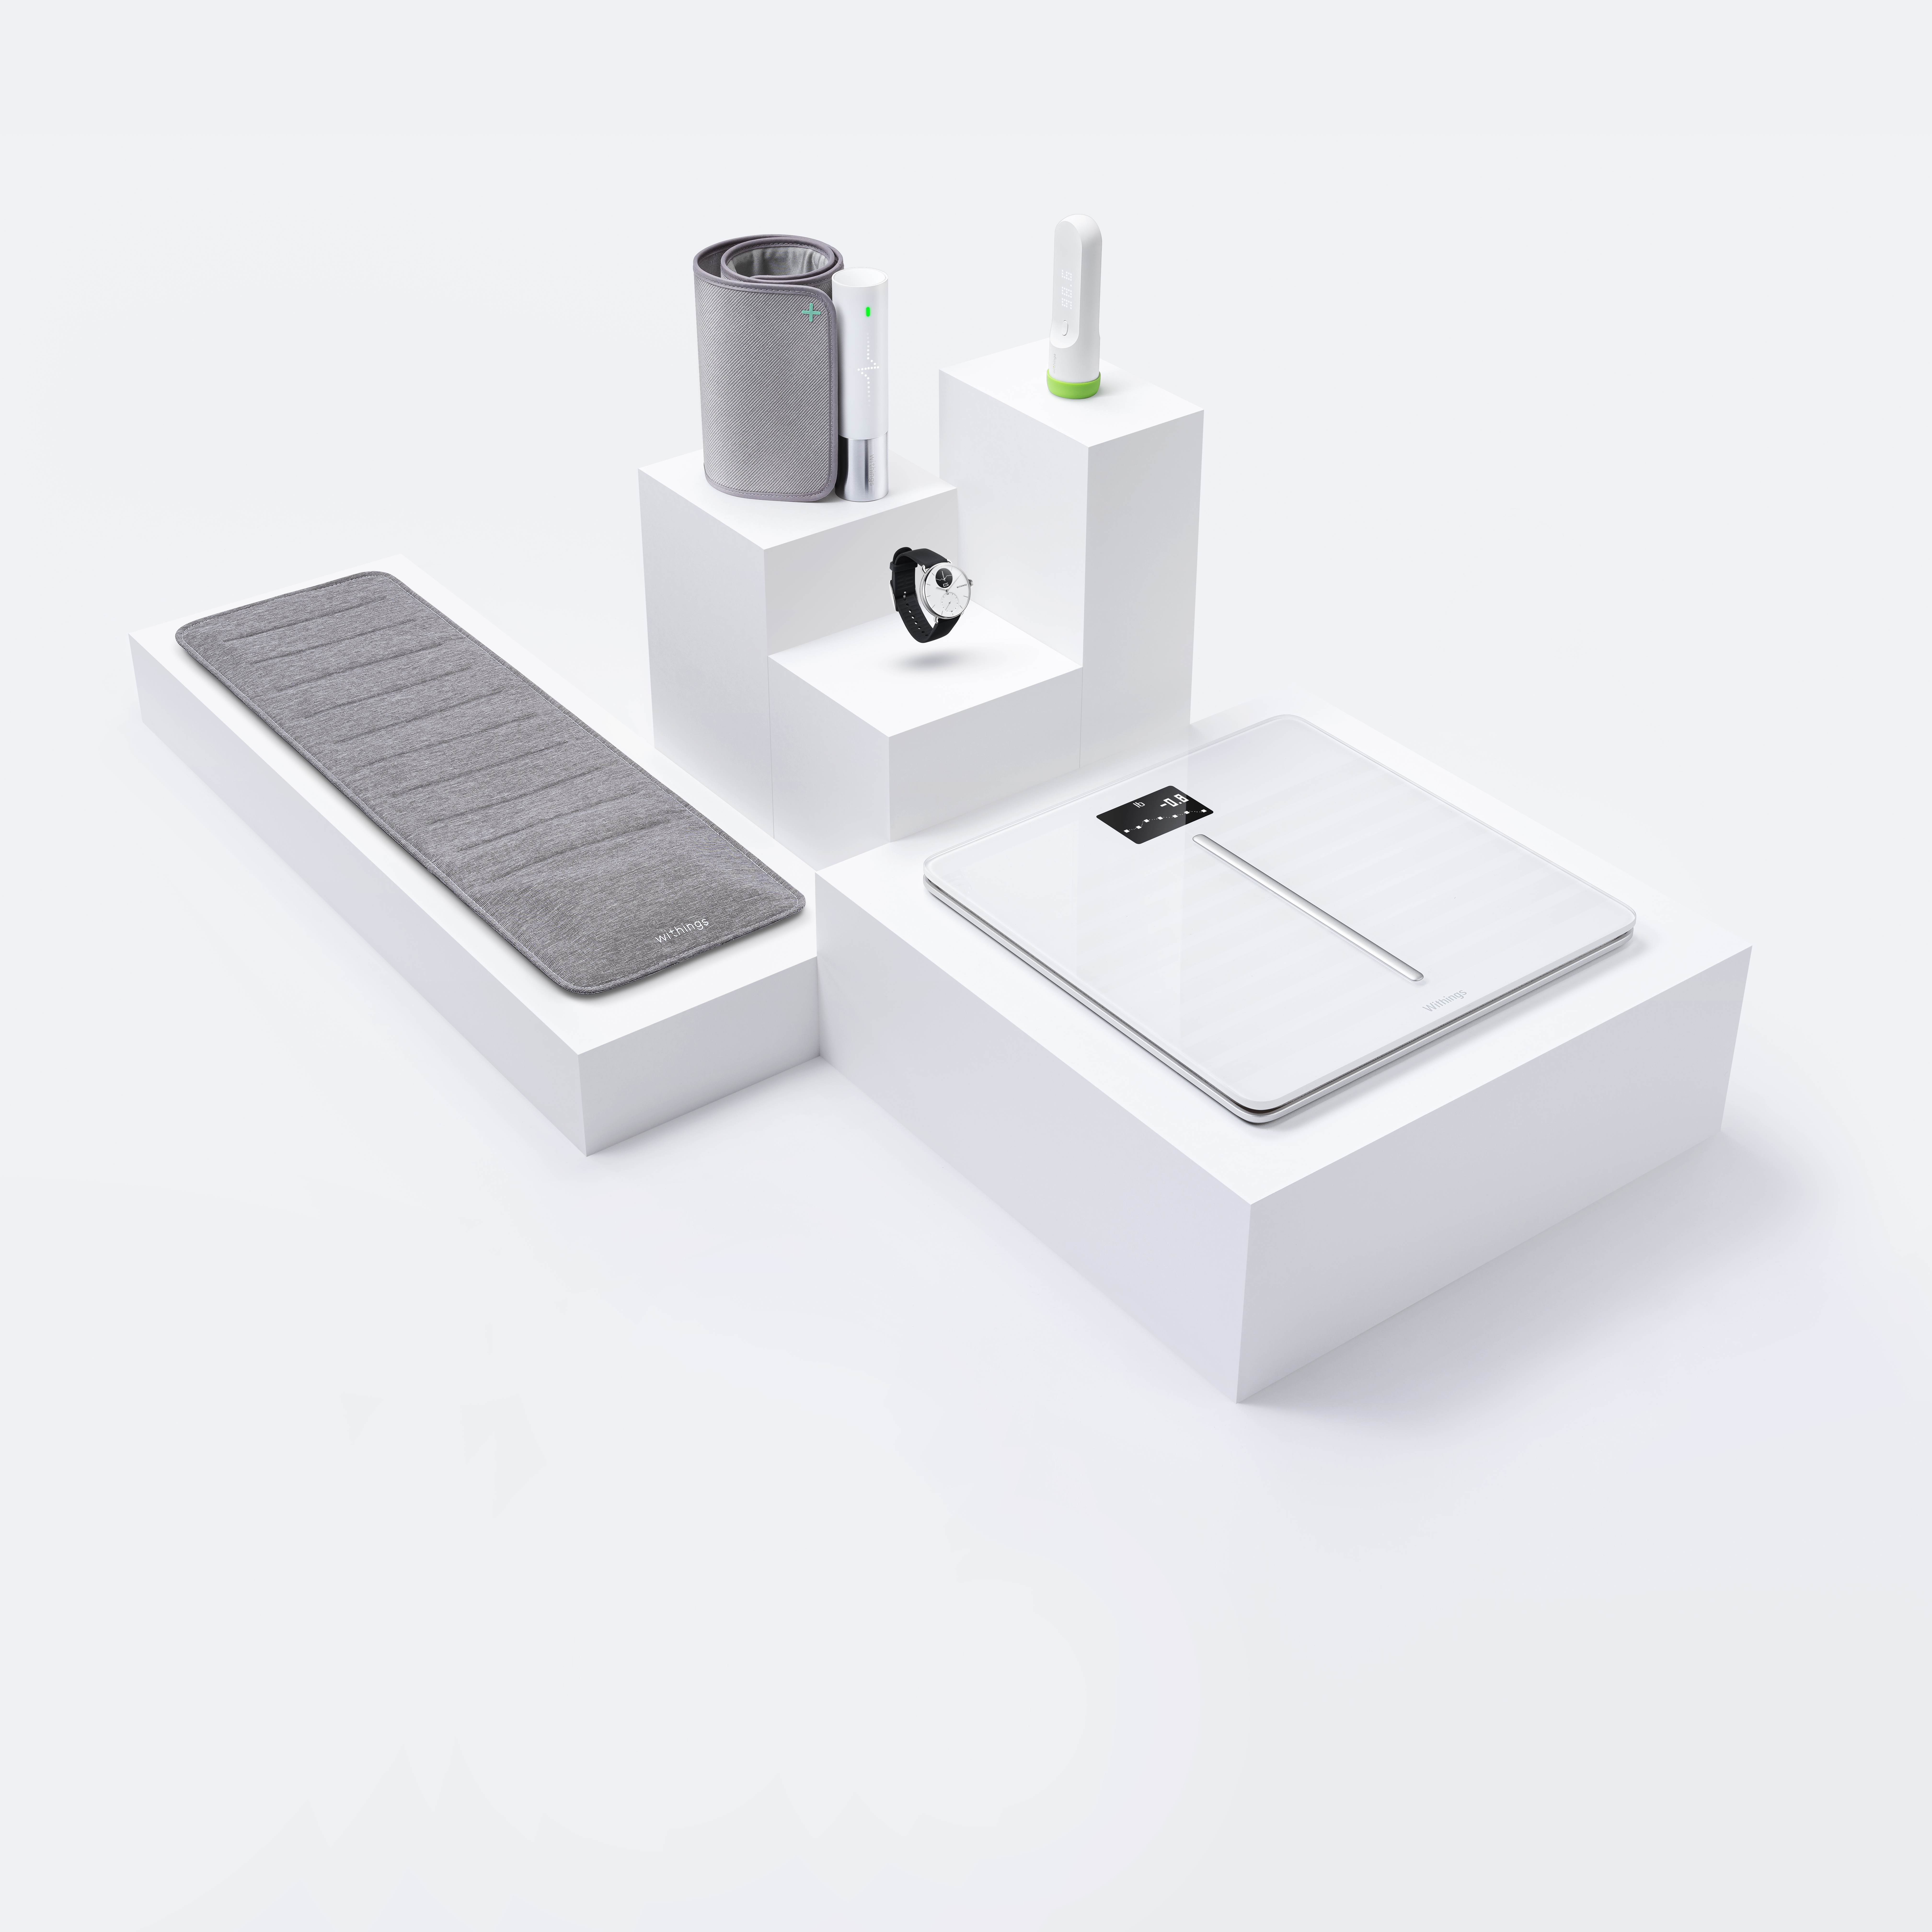 Withings connected devices including a mattress scale and watch